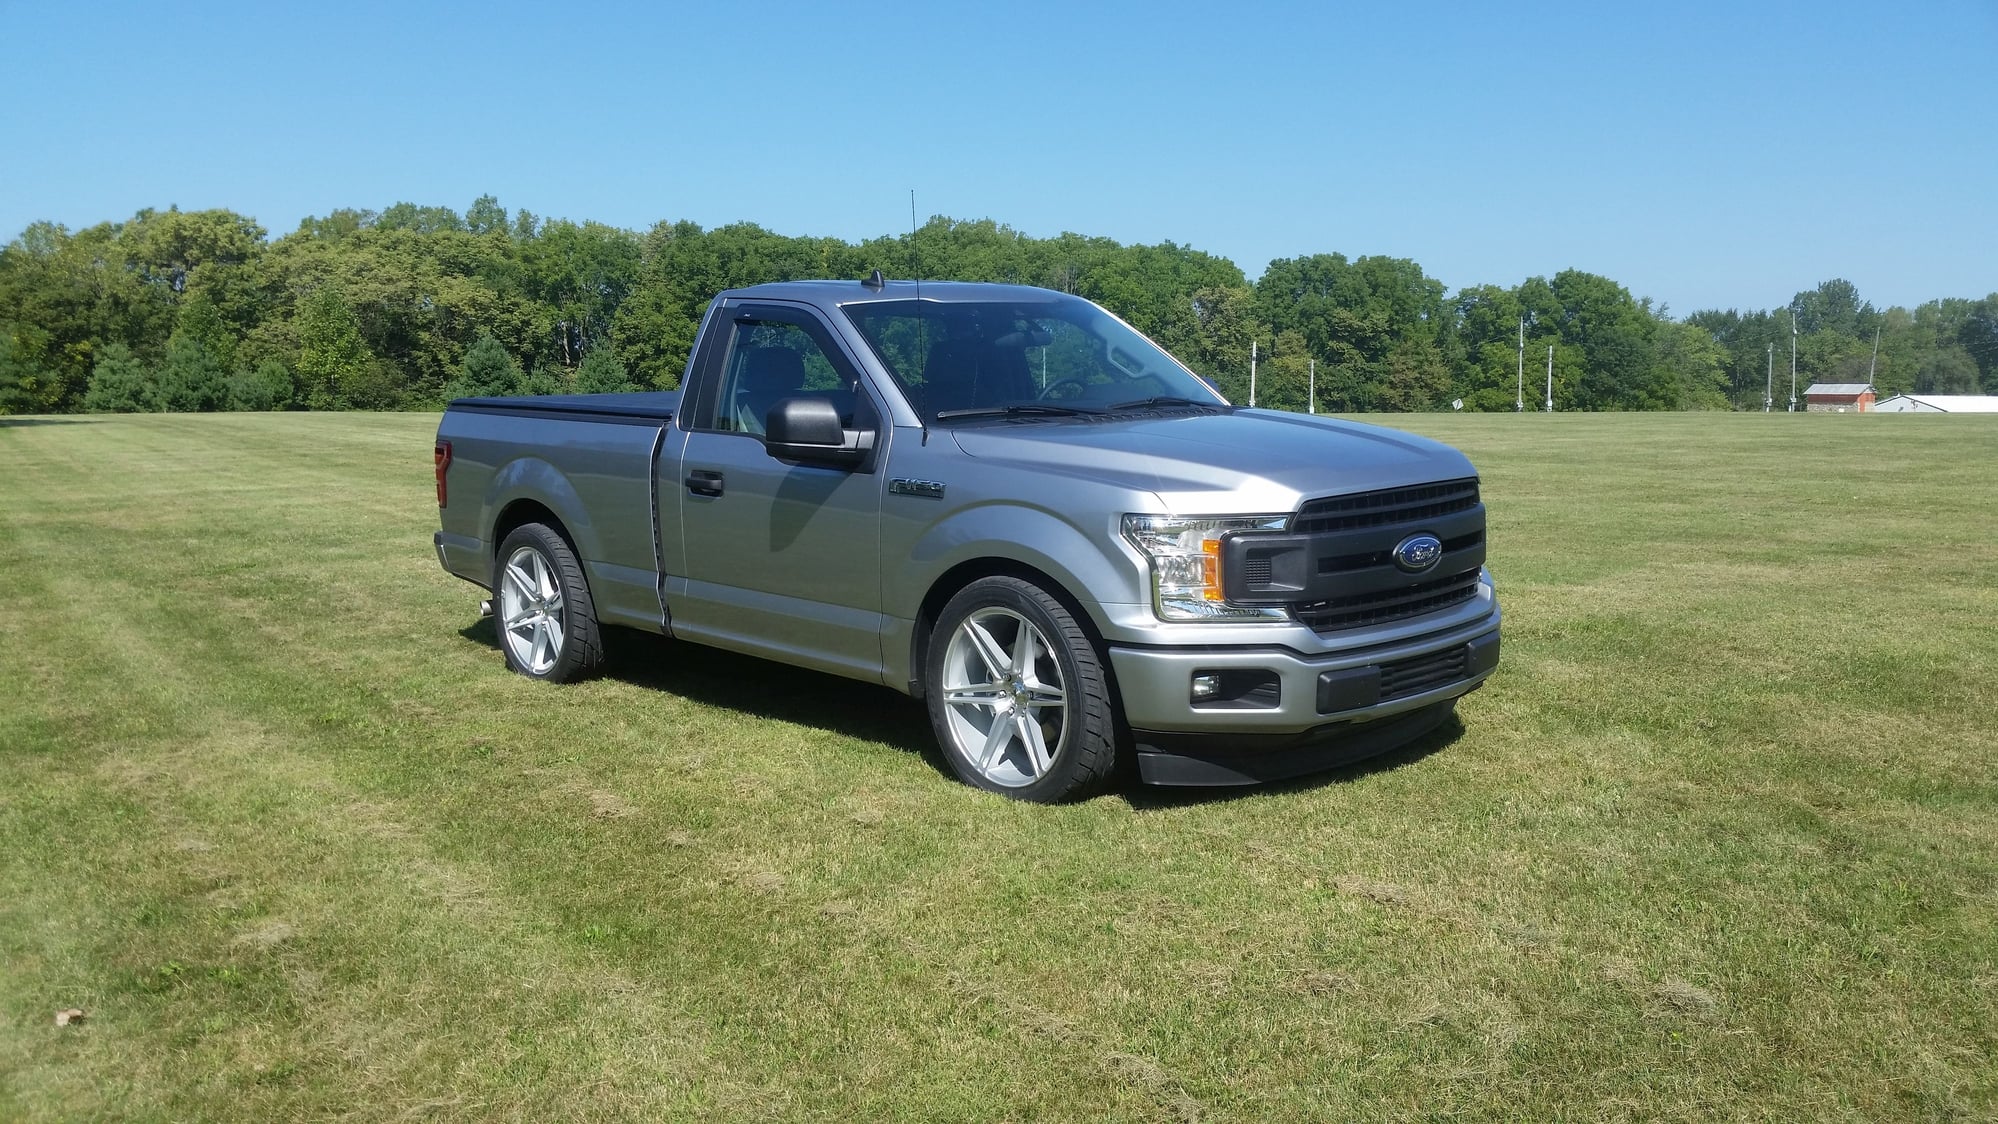 MadViking's 2020 RCSB 4x2 Sport Build Page 2 Ford F150 Forum